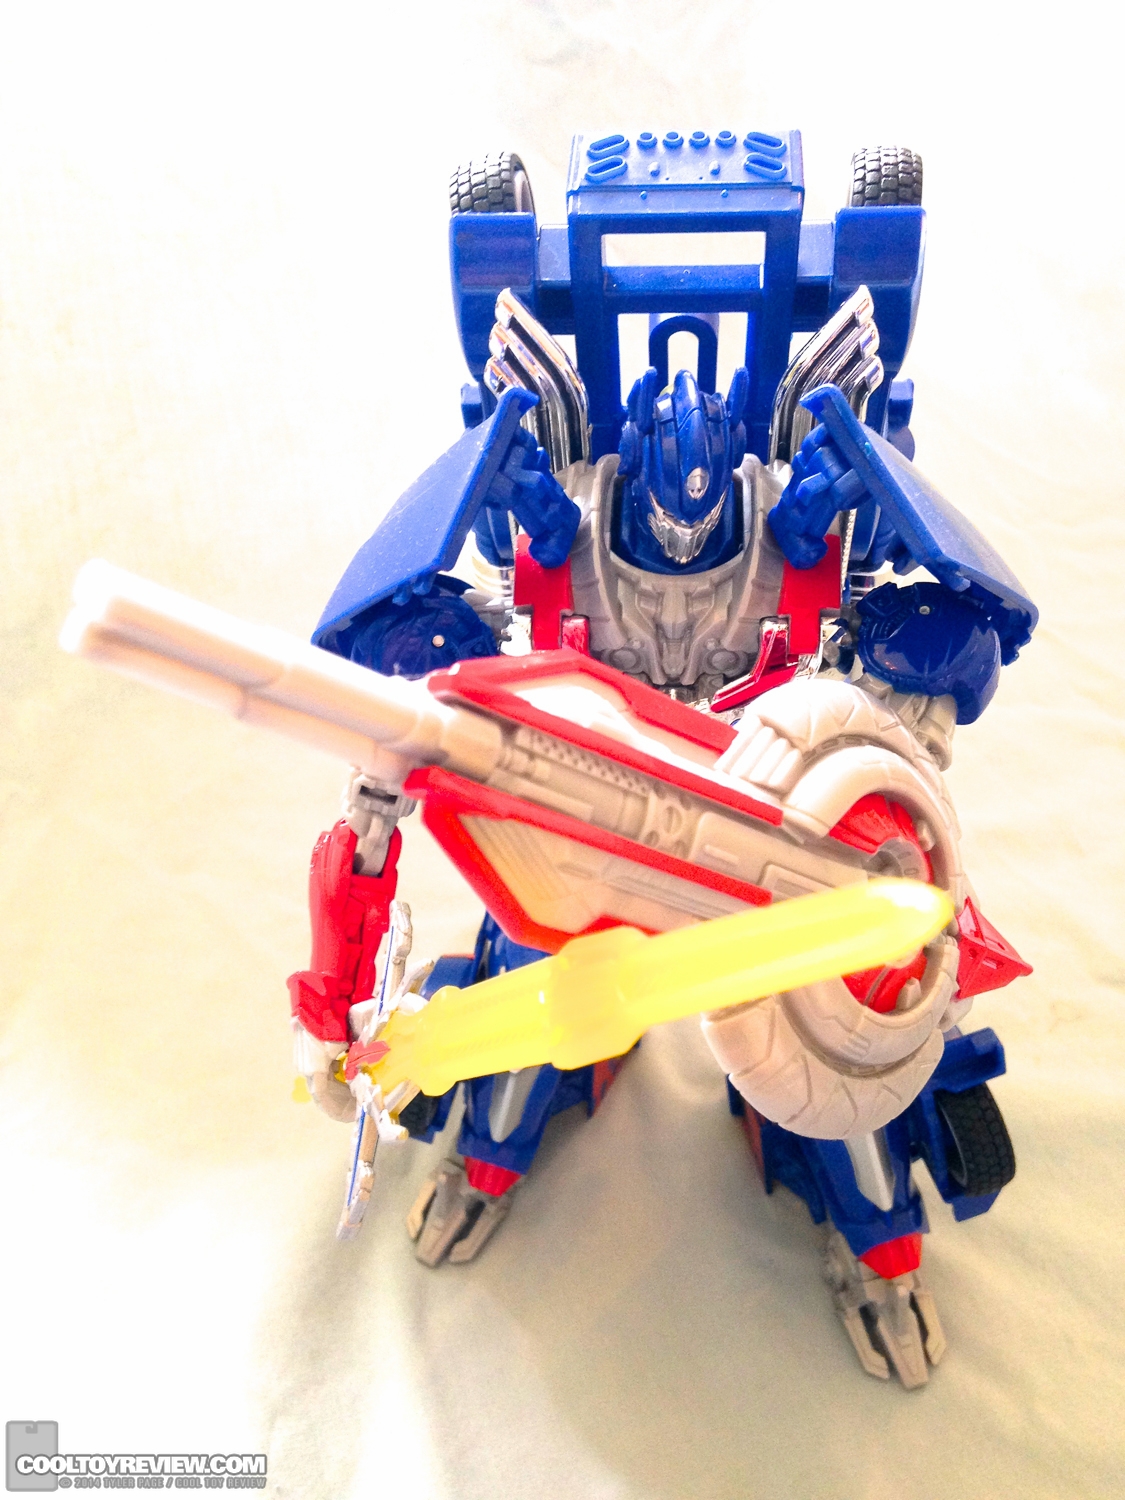 Transformers-Age-of-Extinction-Hasbro-Action-Figures-Review-022.jpg